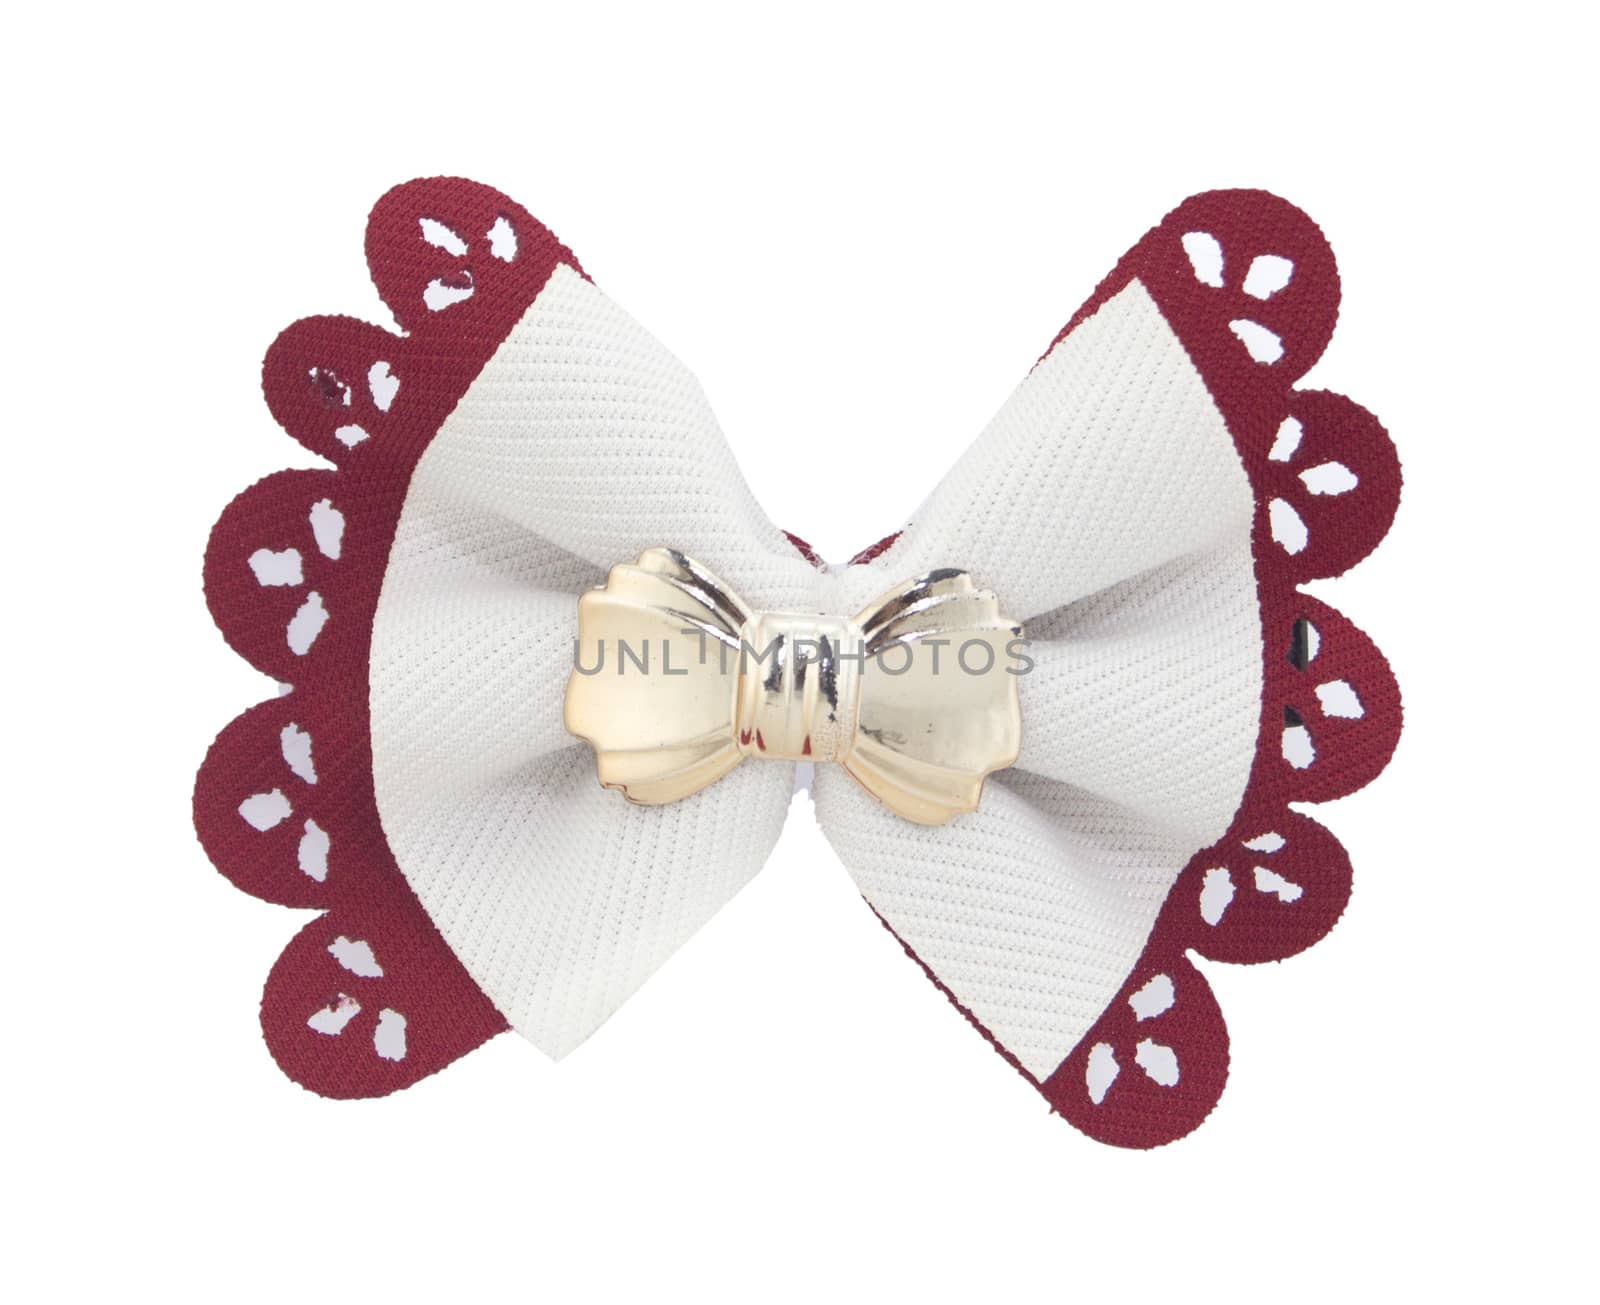 Red and white bow tie by designsstock